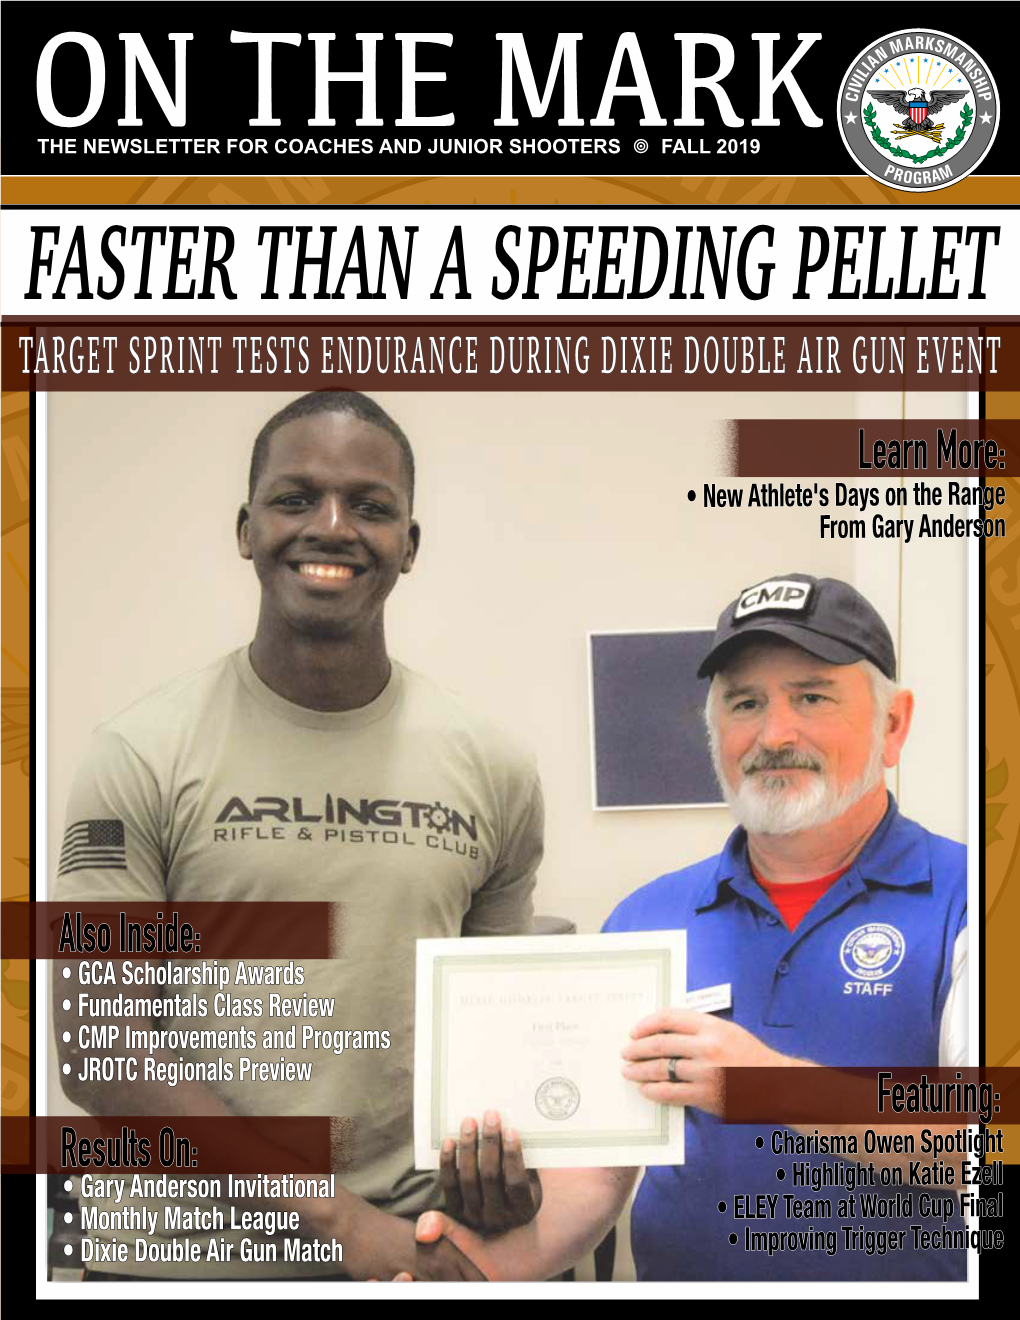 TARGET SPRINT TESTS ENDURANCE DURING DIXIE DOUBLE AIR GUN EVENT Learn More: • New Athlete's Days on the Range from Gary Anderson